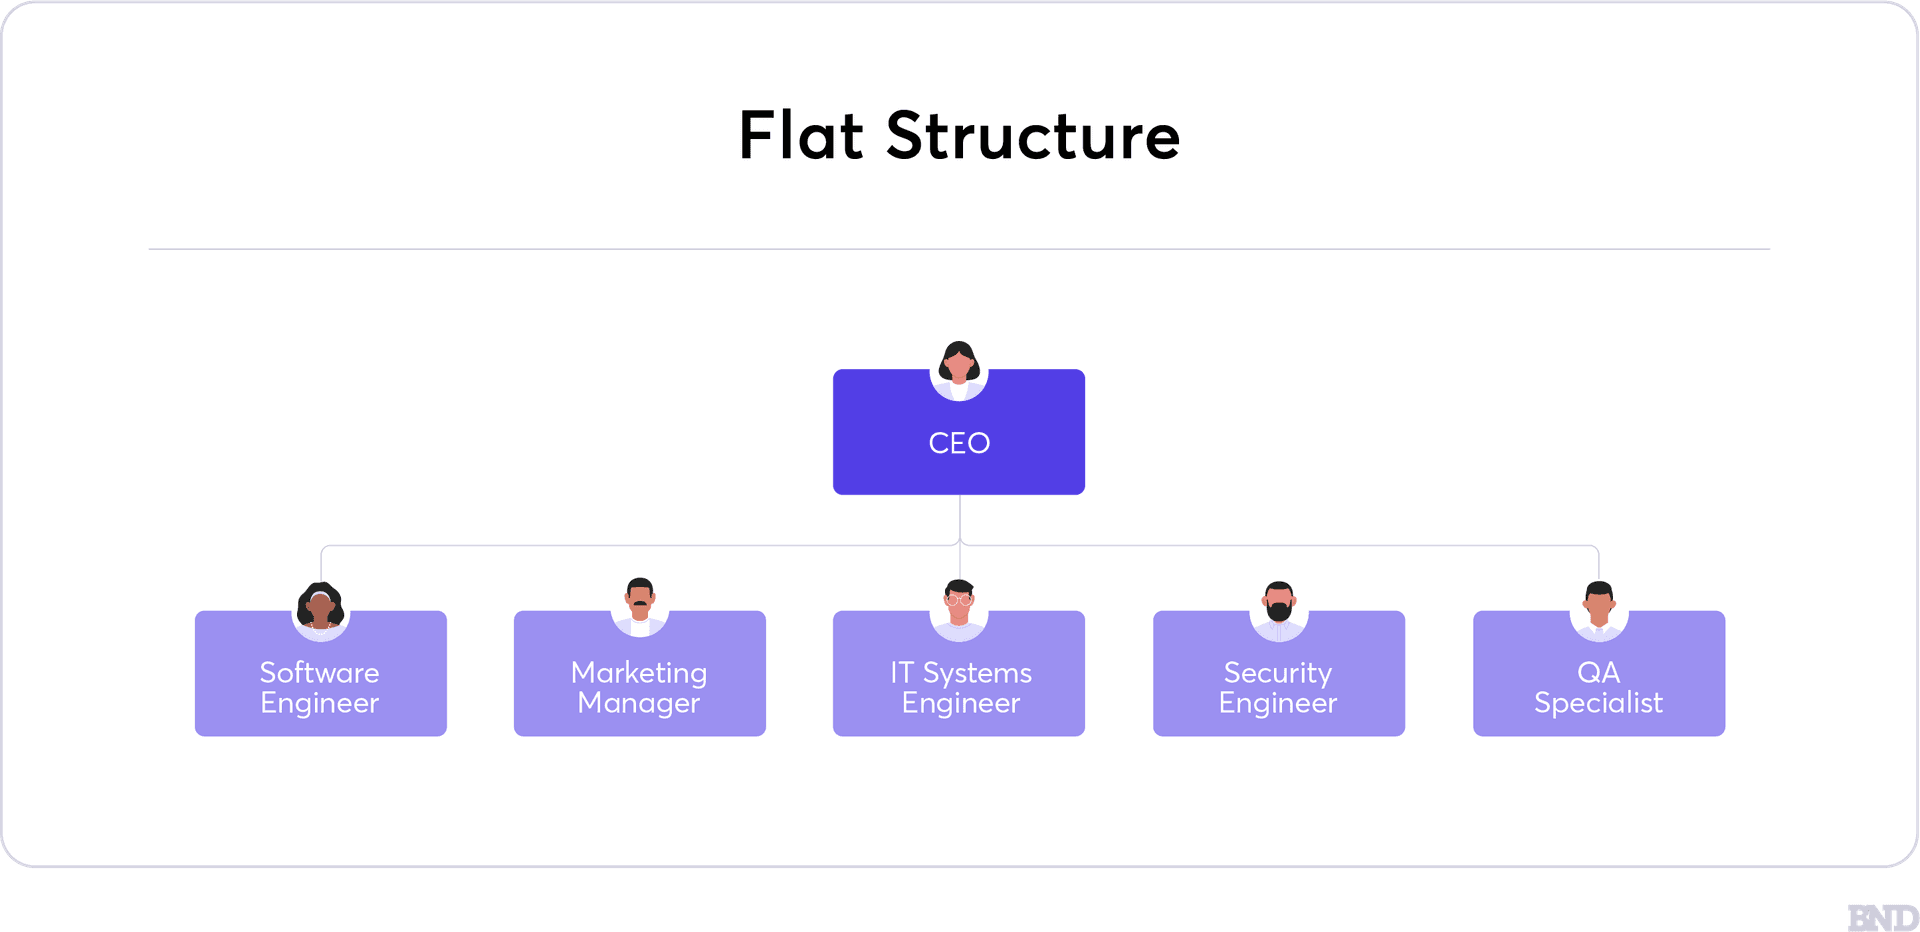 Flat Structure graphic